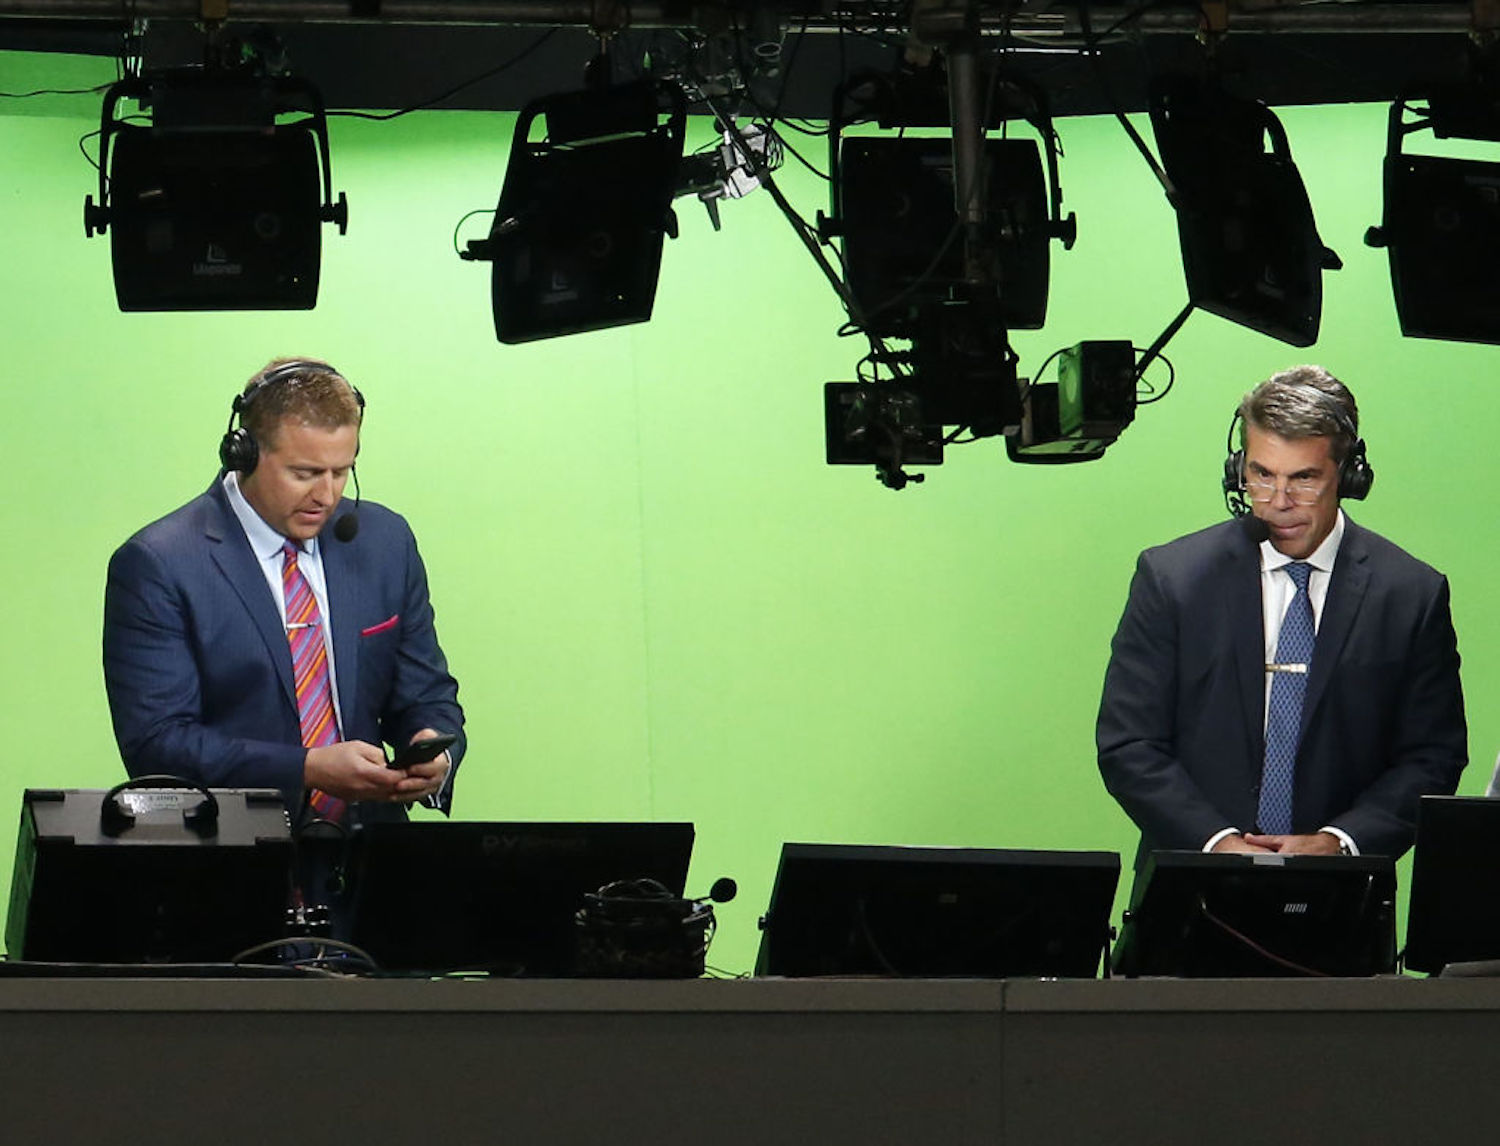 Chris Fowler is ESPN's lead man for college football, but his recent comments hint at a possible run at the Monday Night Football job.